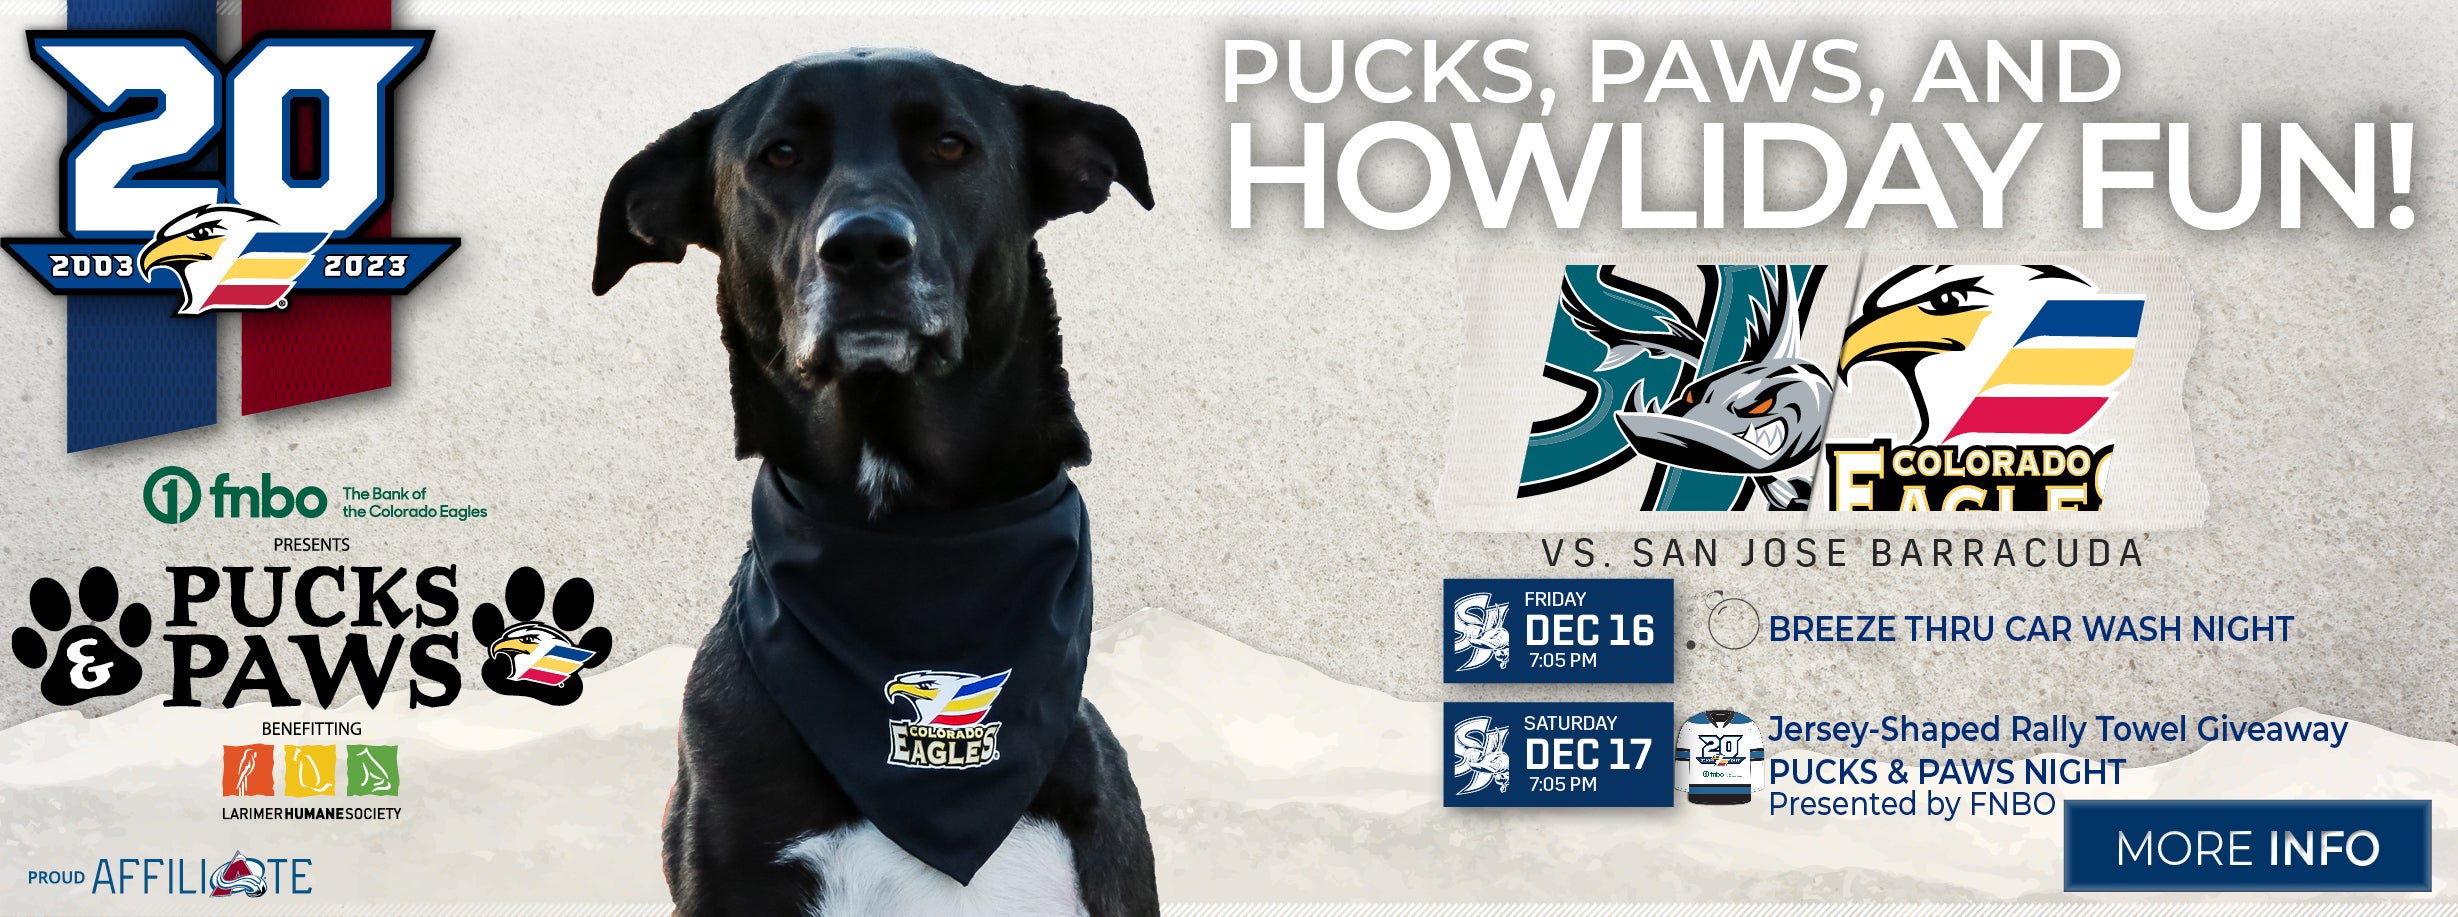 Pucks, paws, and howliday fun this weekend